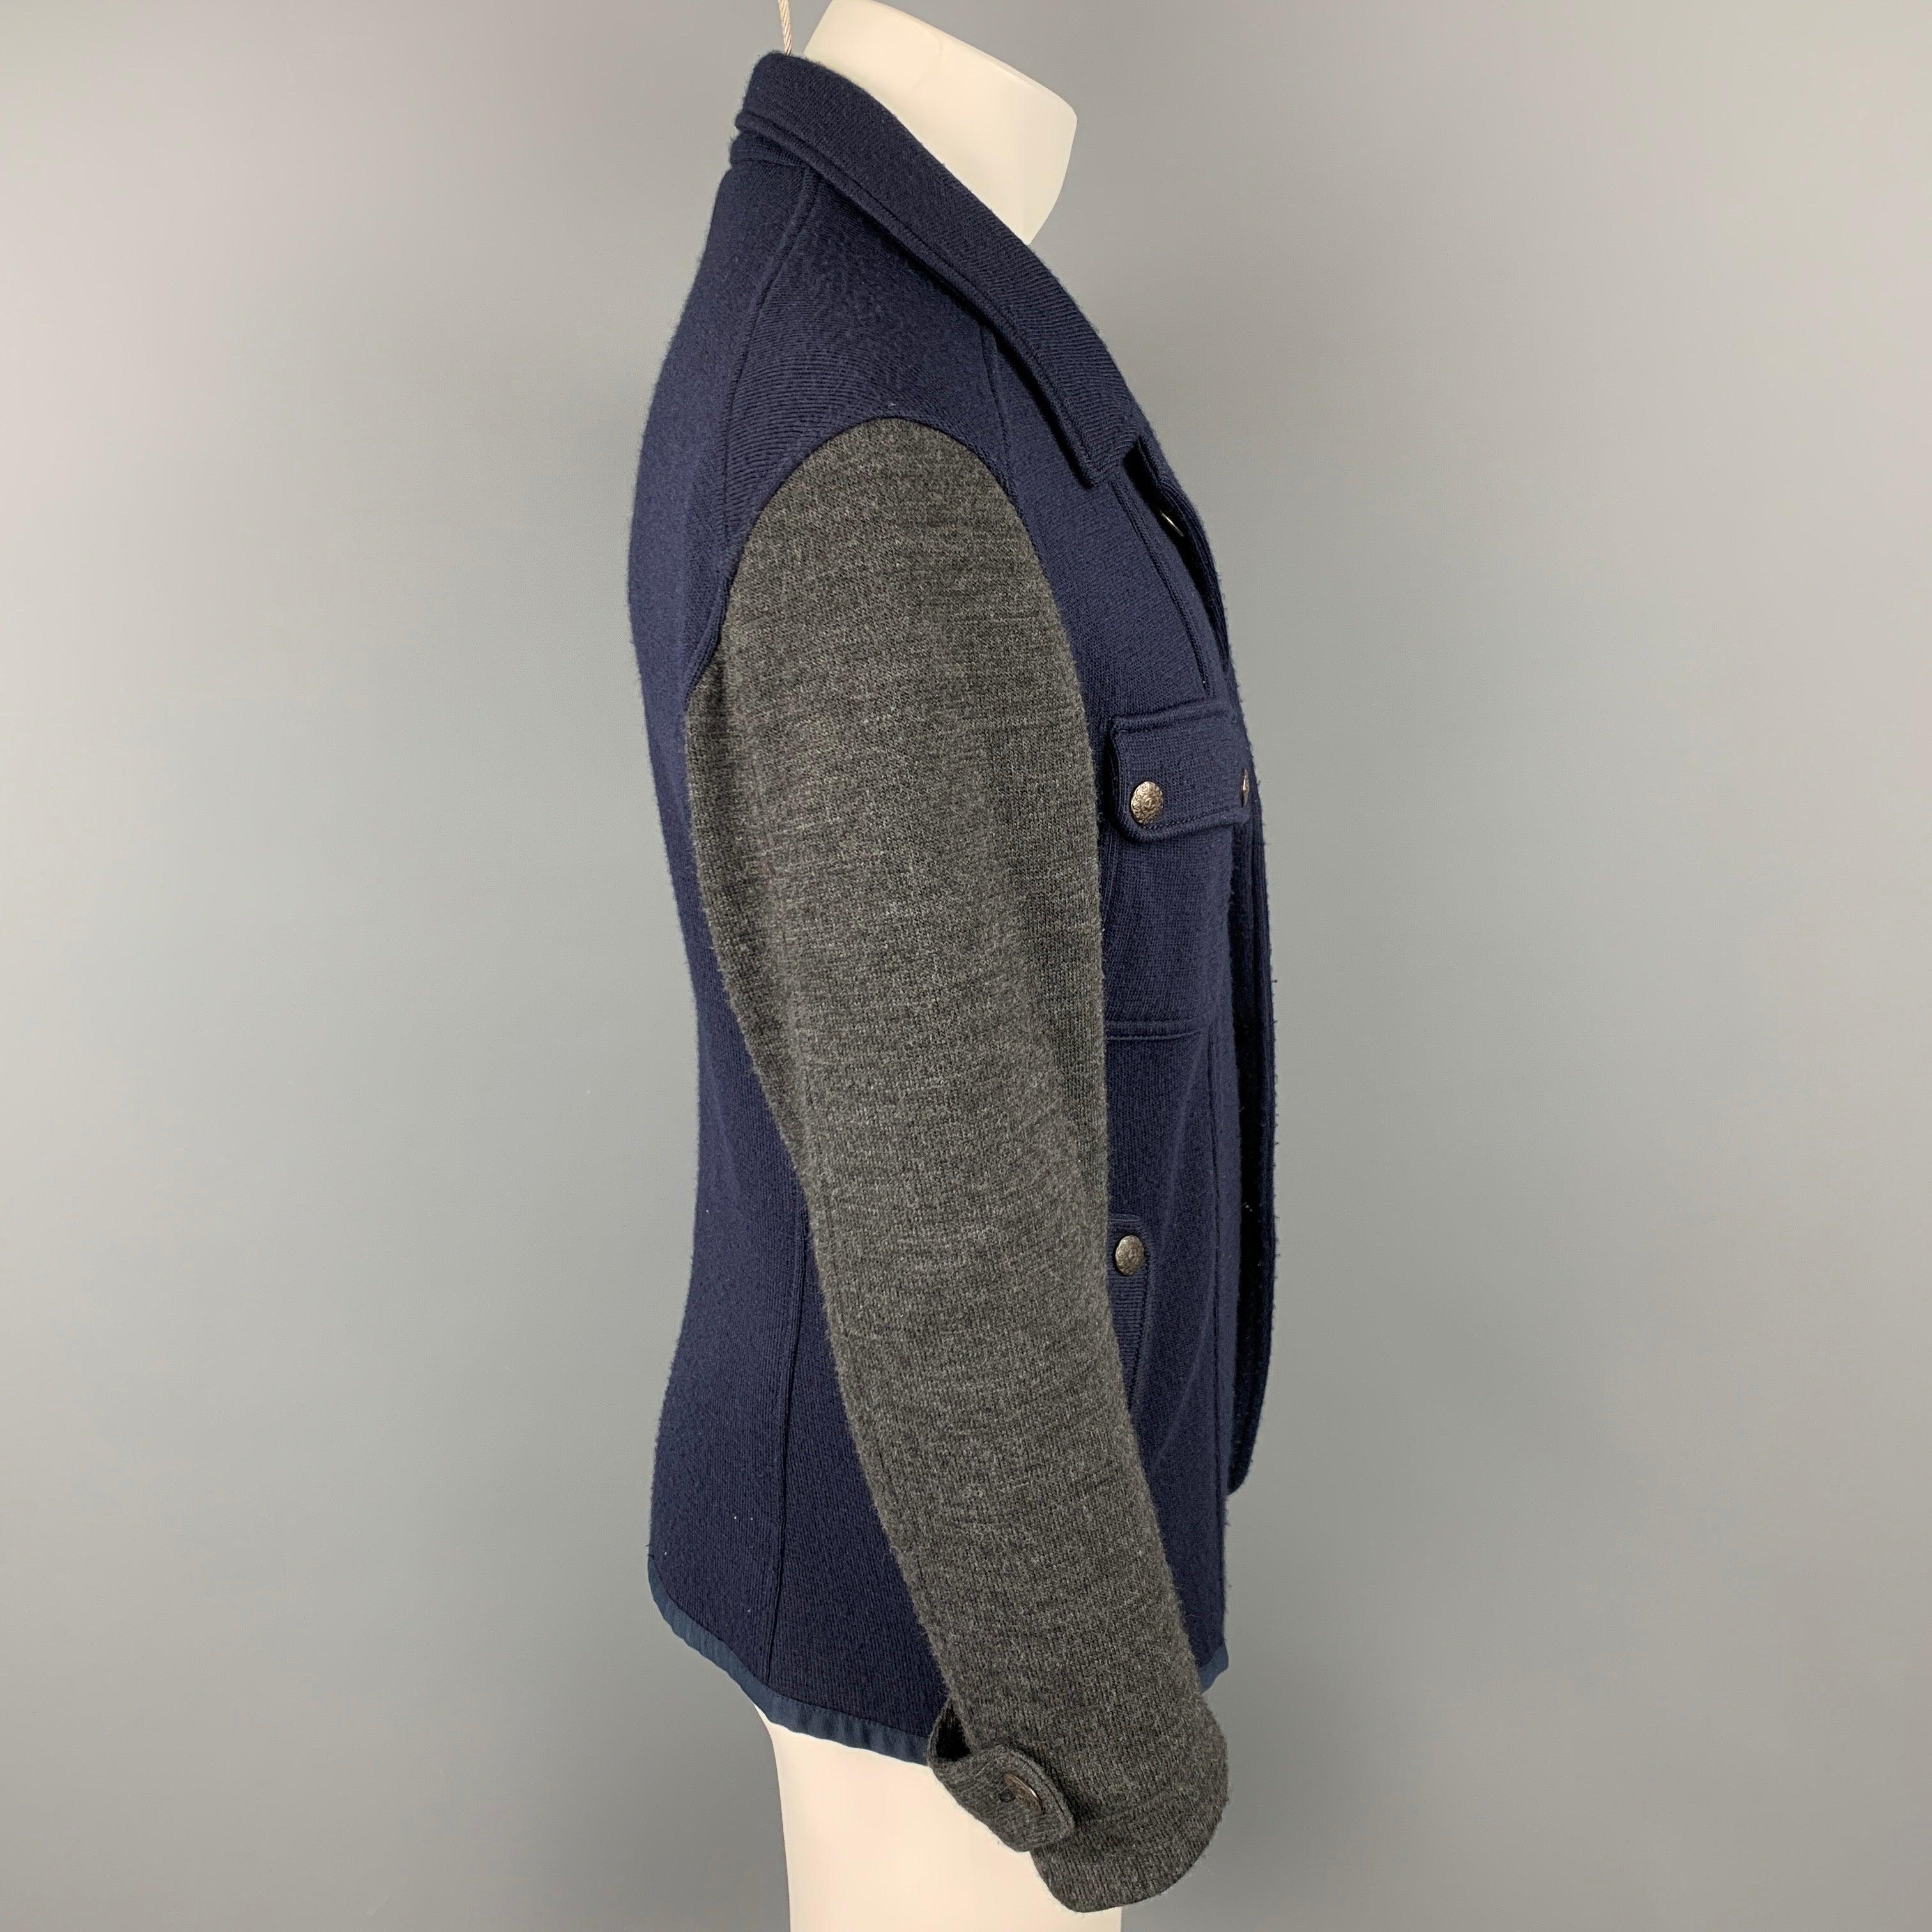 JUST CAVALLI jacket comes in a navy & grey color block knitted material featuring spread collar, flap pockets, and a metal button closure.
Very Good
Pre-Owned Condition. 

Marked:   52 

Measurements: 
 
Shoulder: 20.5 inches  Chest: 44 inches 